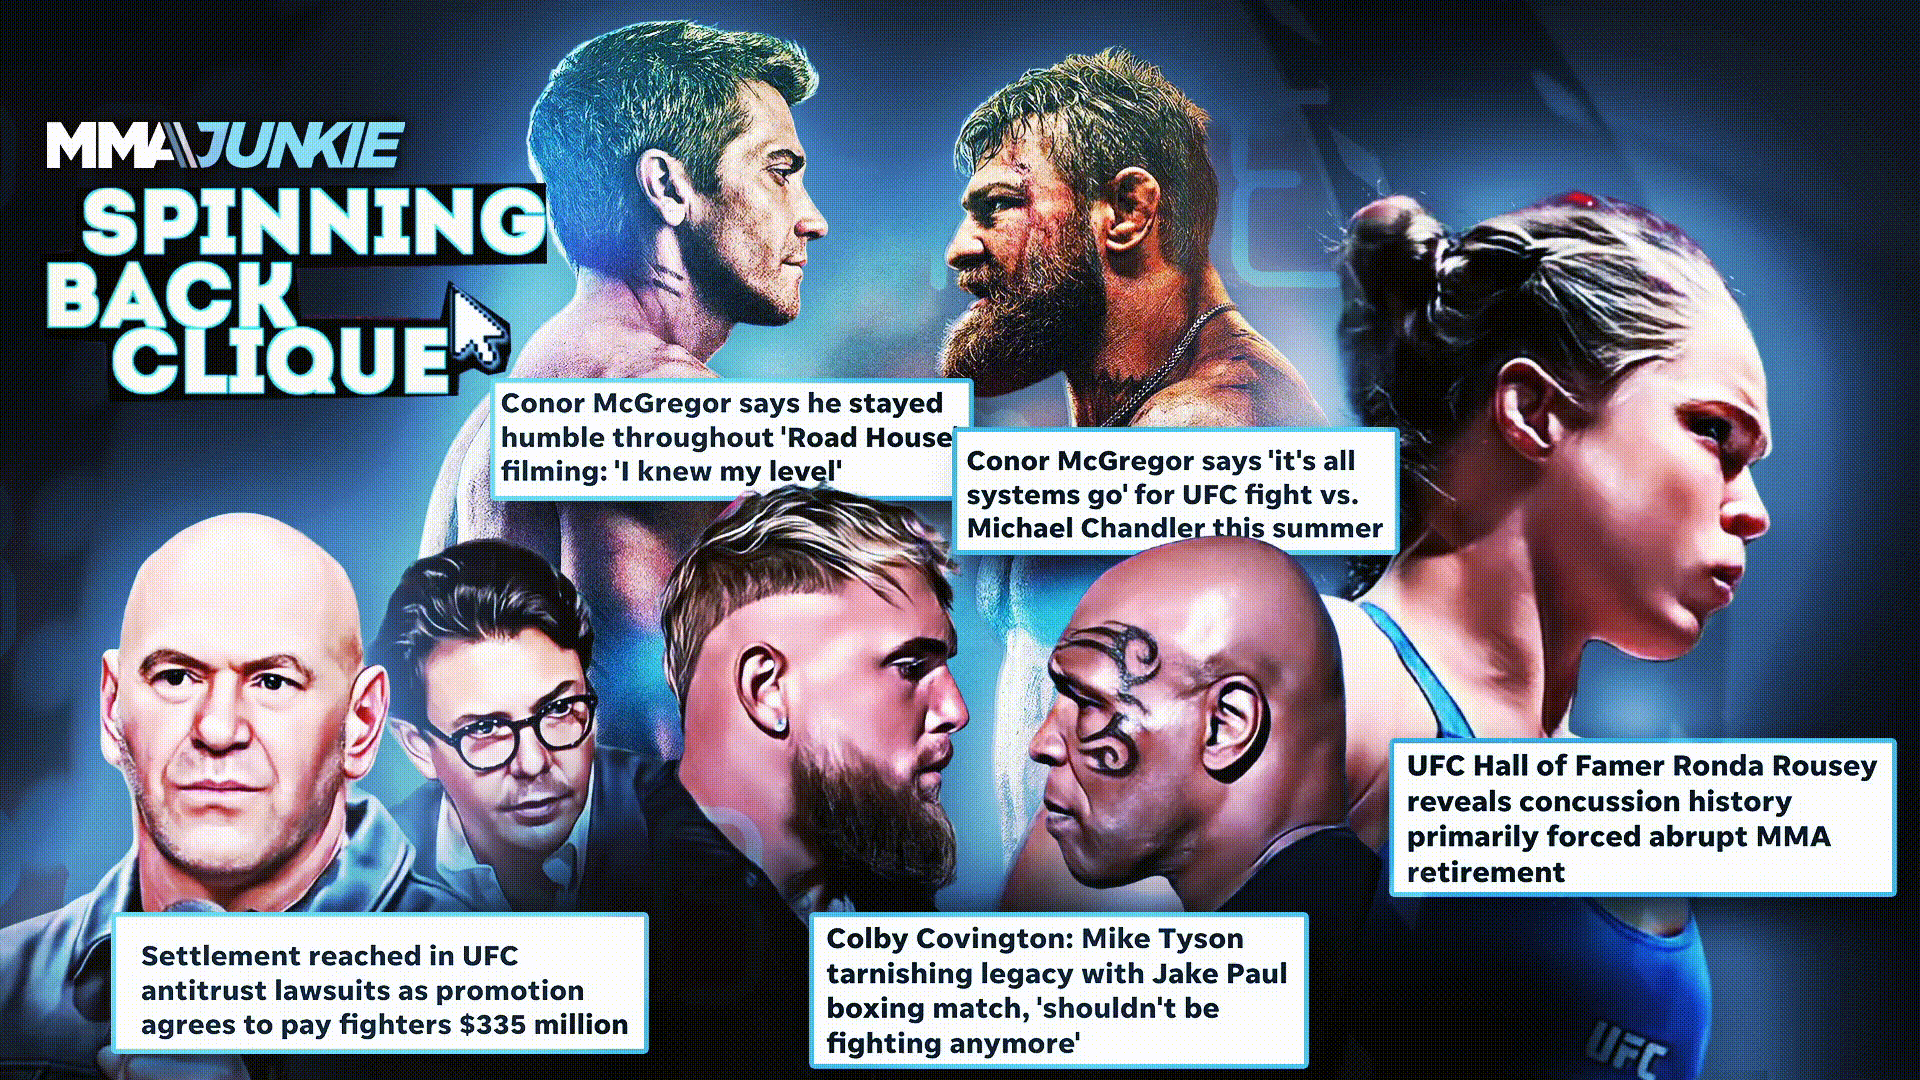 Spinning Back Clique REPLAY: UFC antitrust settlement, Ronda Rousey, Conor McGregor, Paul-Tyson and more